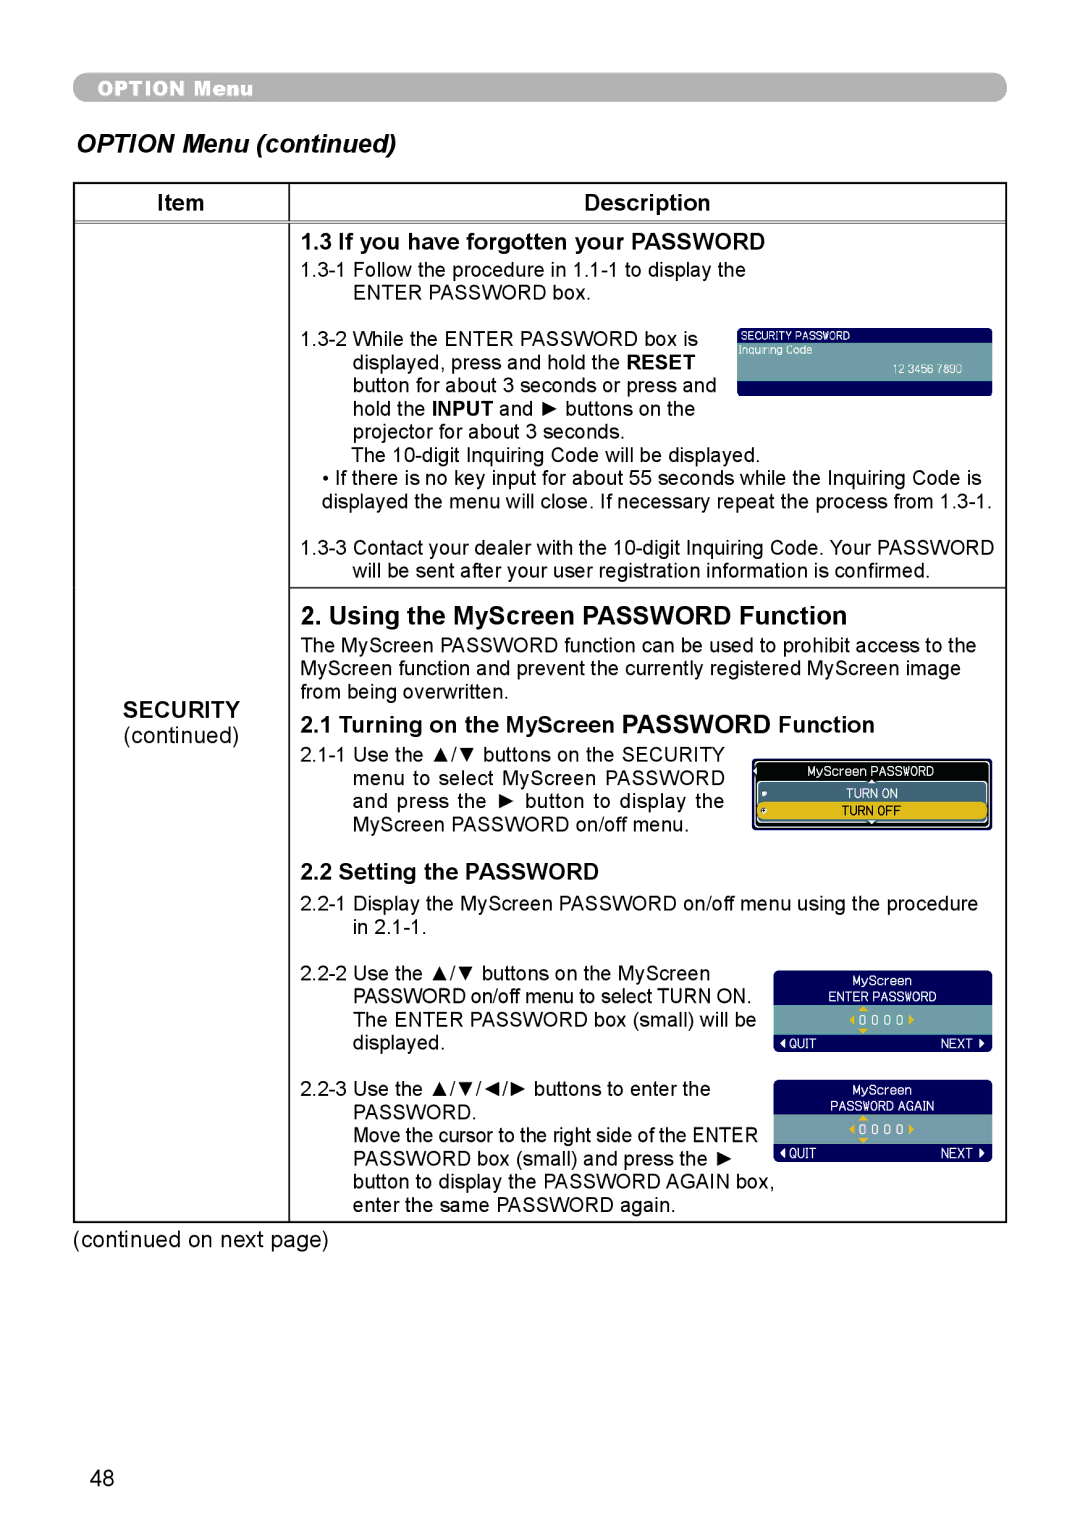 Epson 8100 user manual Using the MyScreen Password Function, If you have forgotten your Password, Setting the Password 